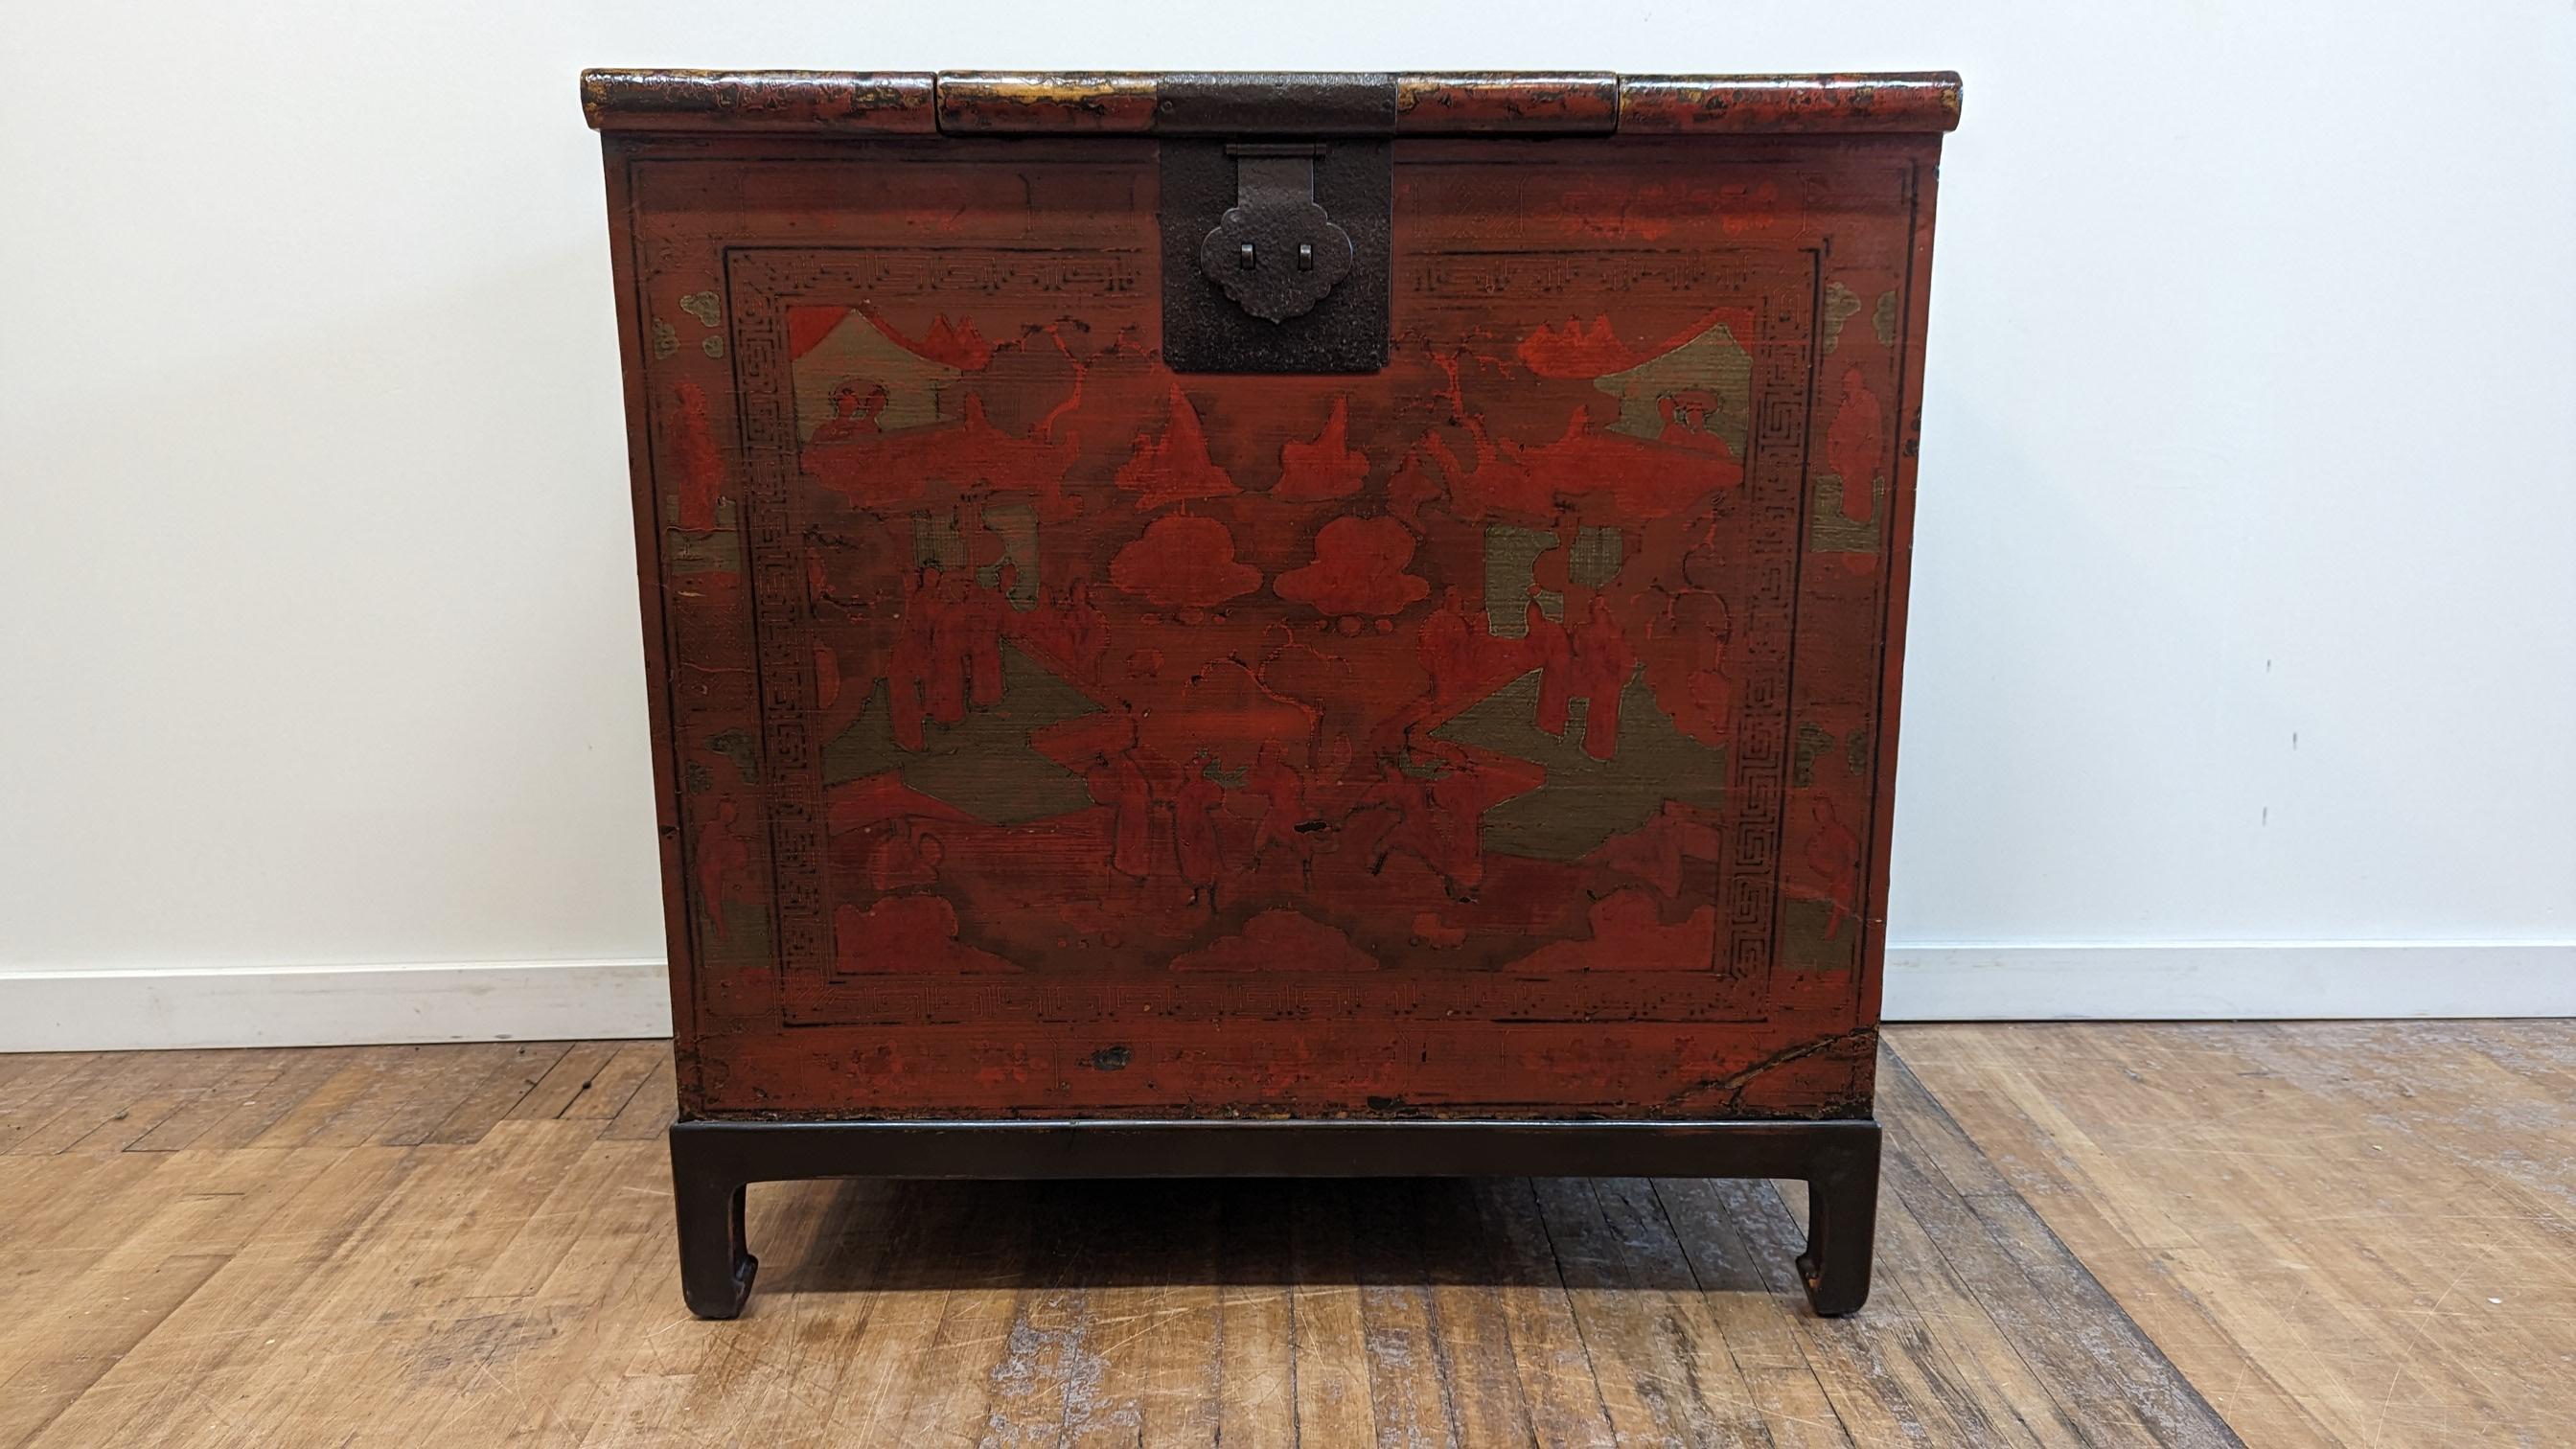 19th Century Lacquered Chinese Trunk of the Qing Dynasty.   Large wardrobe chest with worn red lacquer and hand gilt painting.  Unlike most Traditional Trunks a very large lip - rim overhangs the top front of the Chest.  A smaller opening to the top